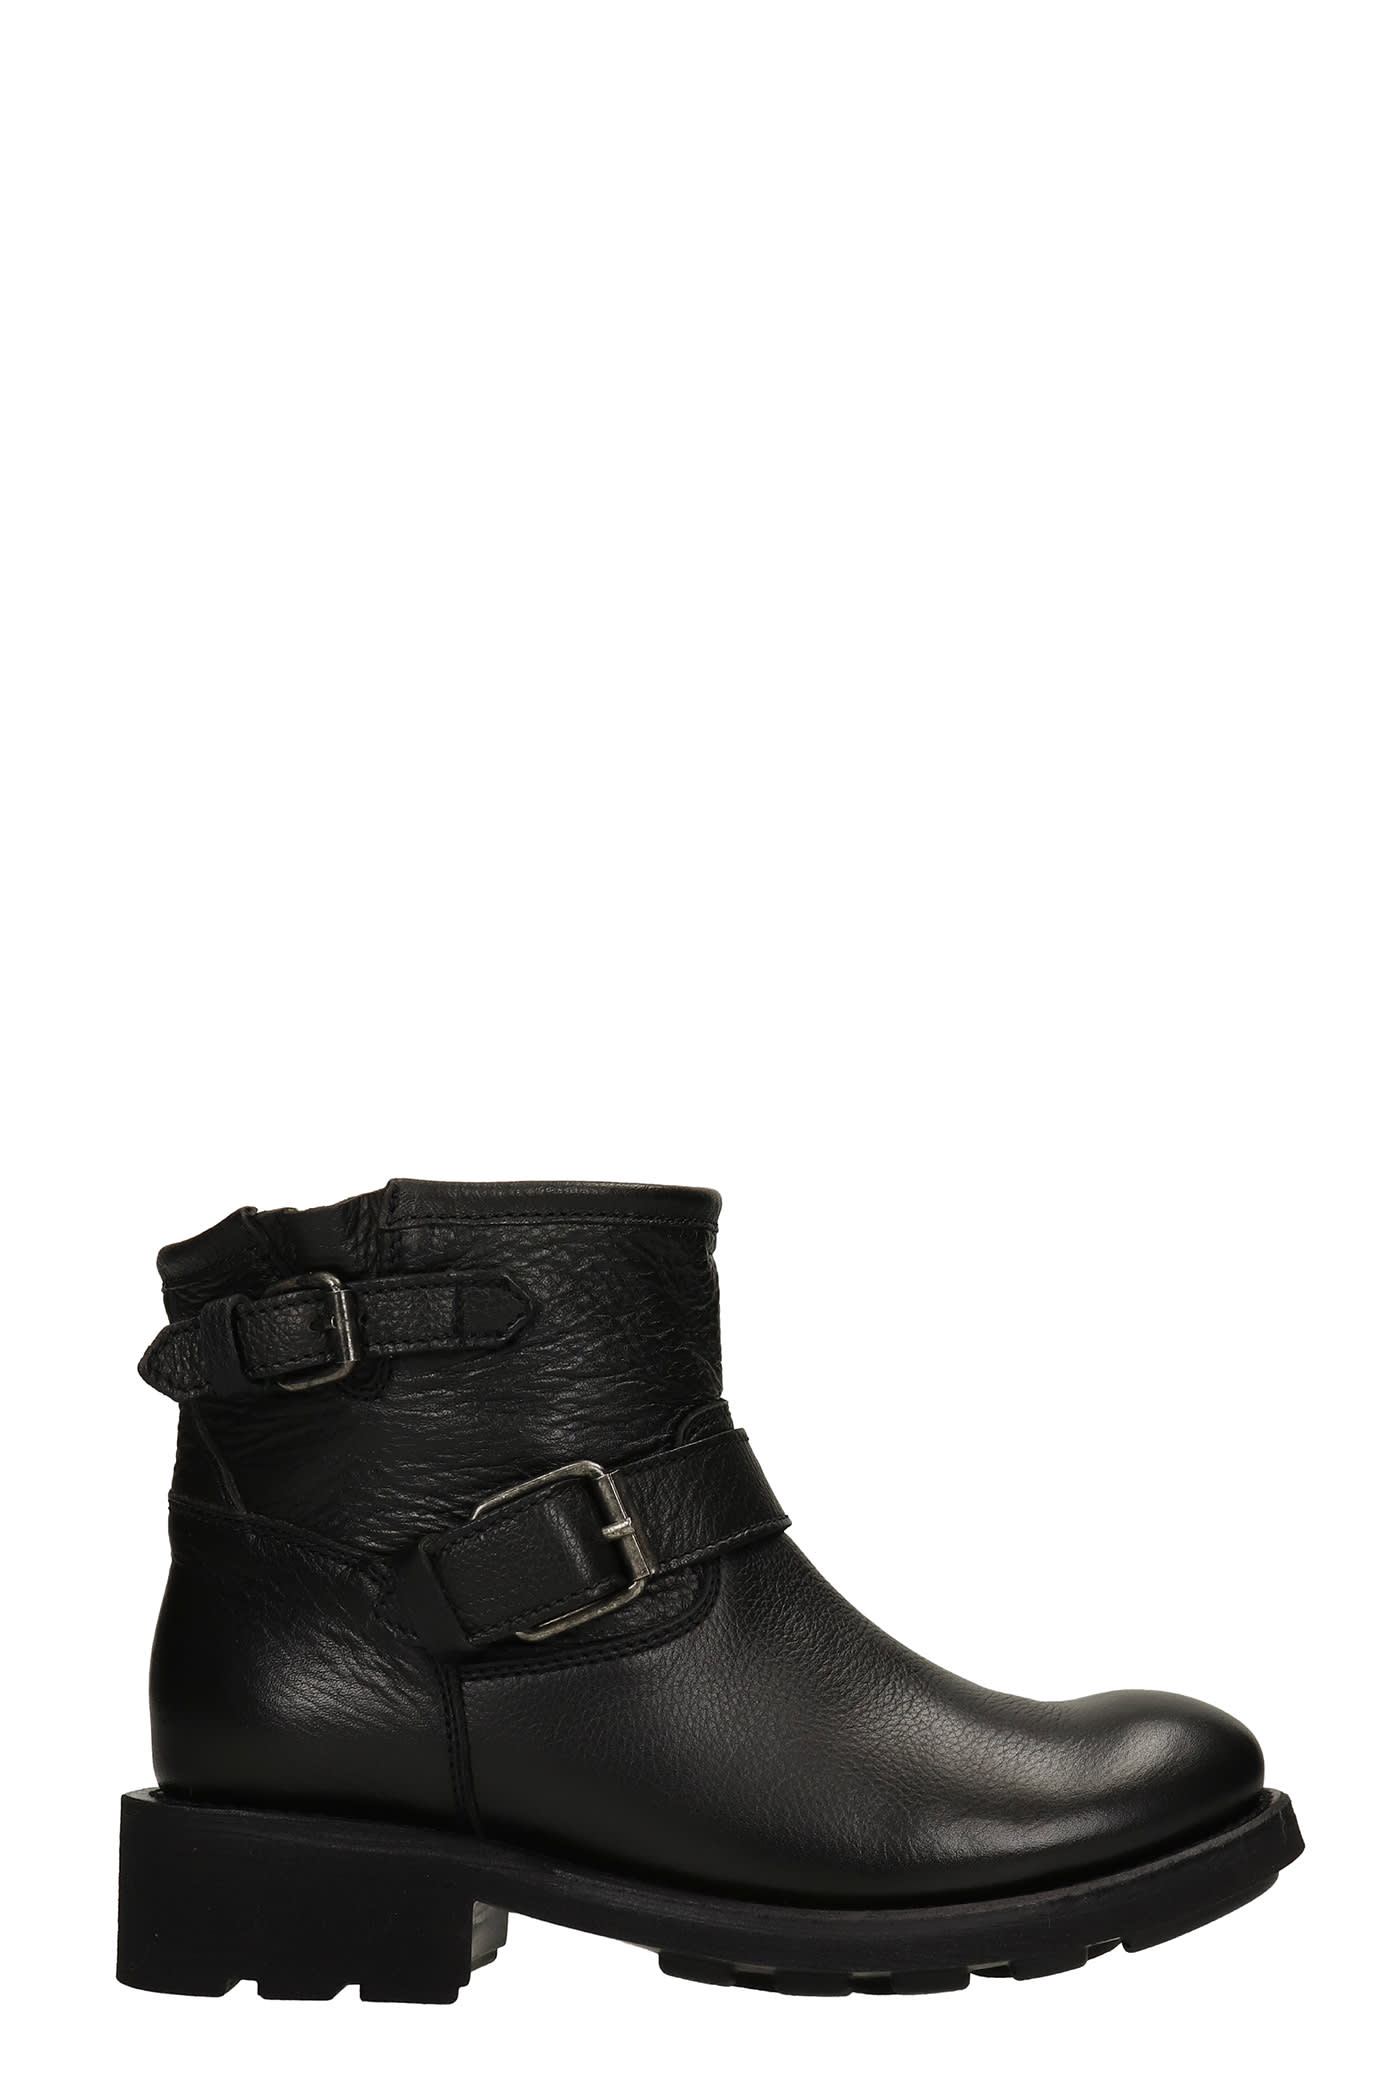 Ash Trick Low Heels Ankle Boots In Black Leather